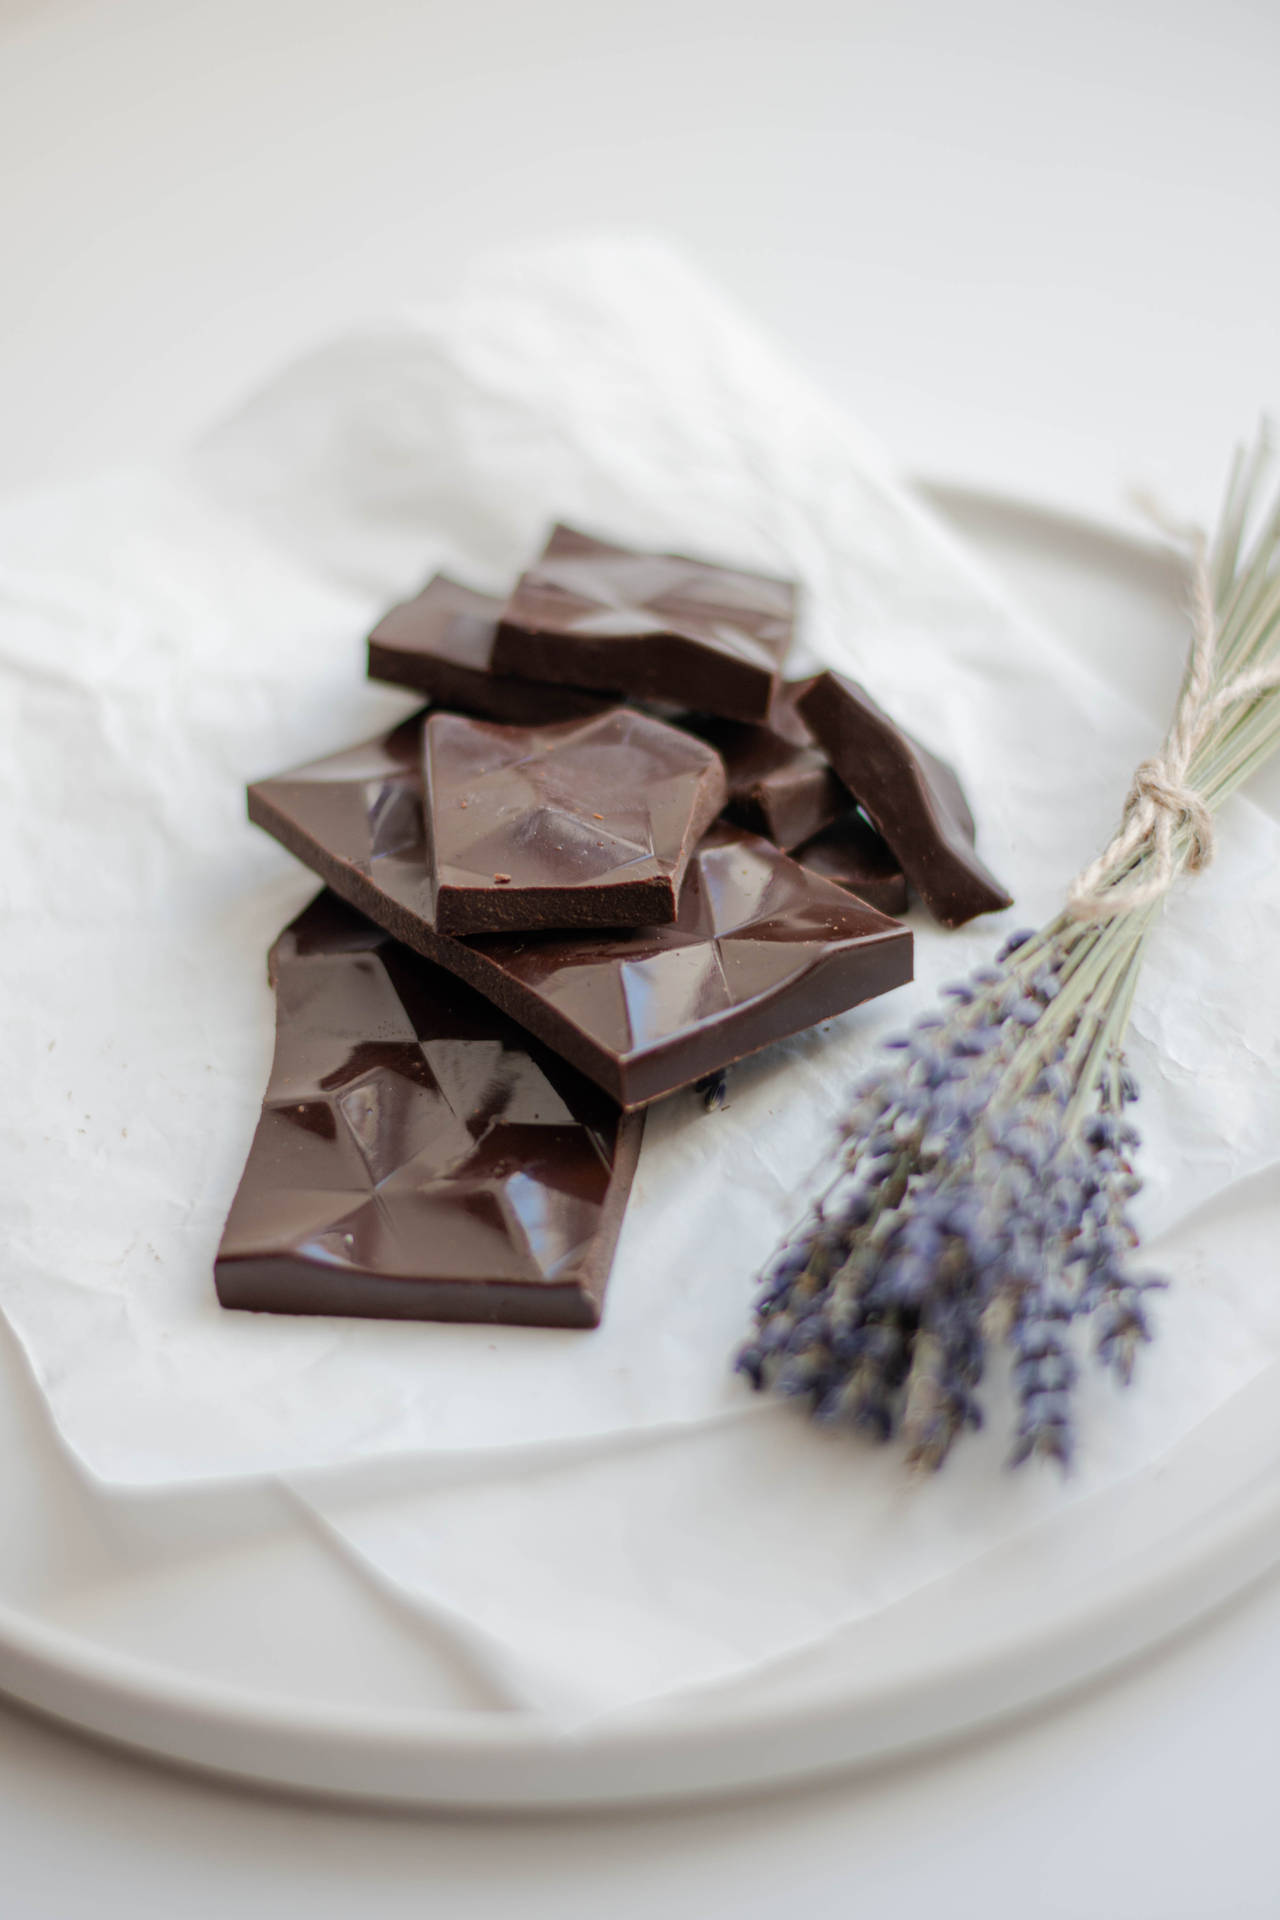 Chocolate Bars And Lavender Background